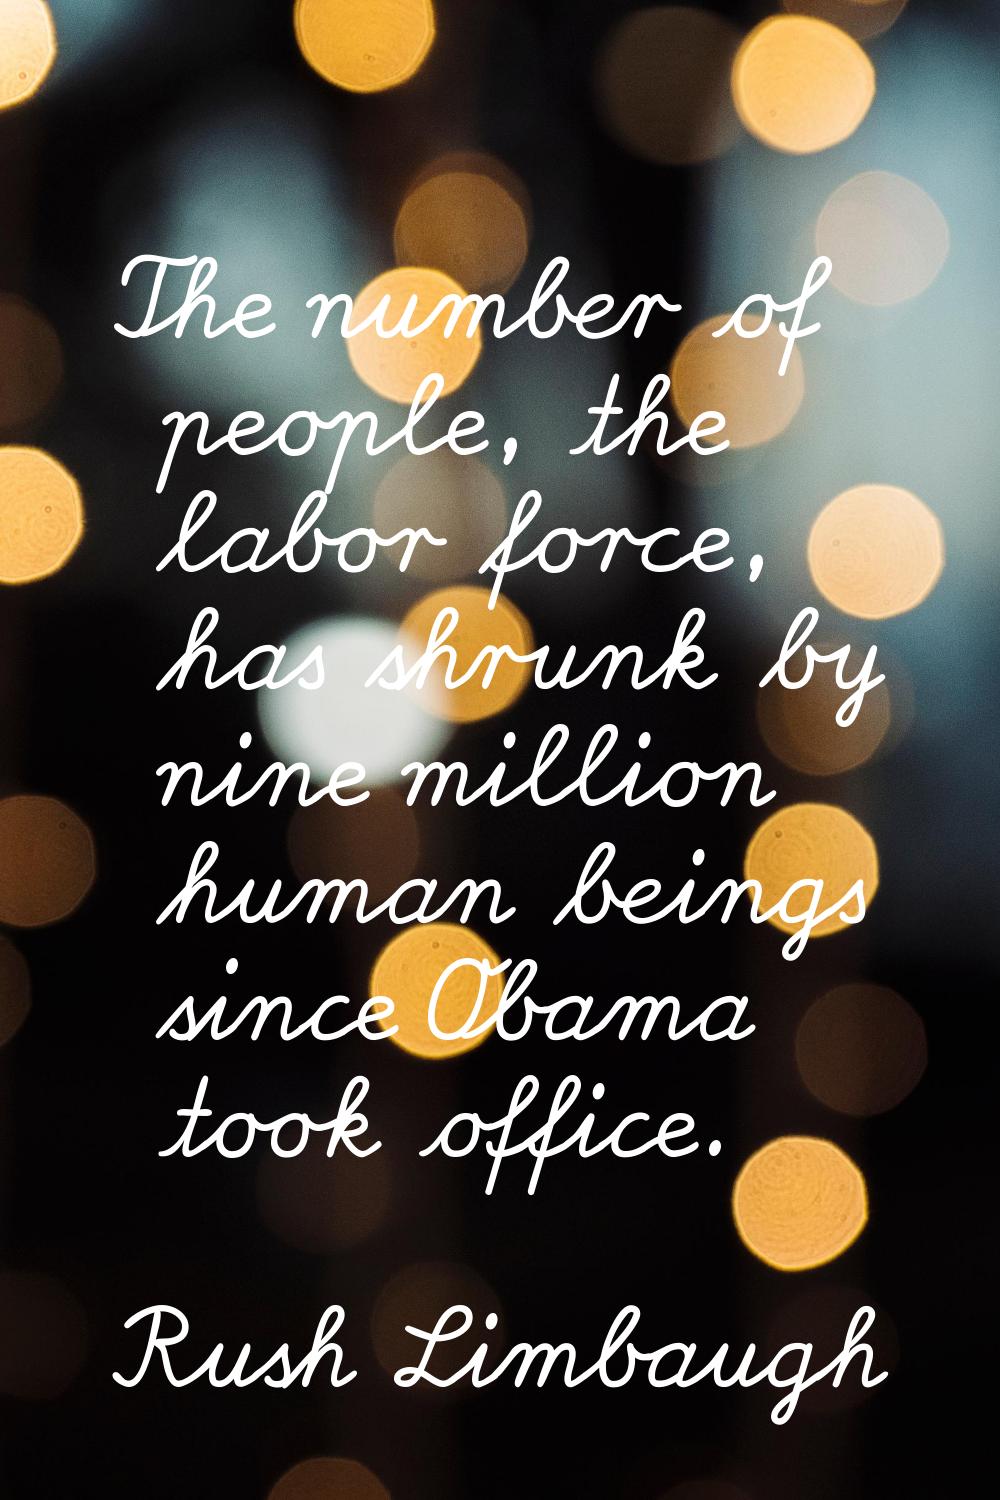 The number of people, the labor force, has shrunk by nine million human beings since Obama took off